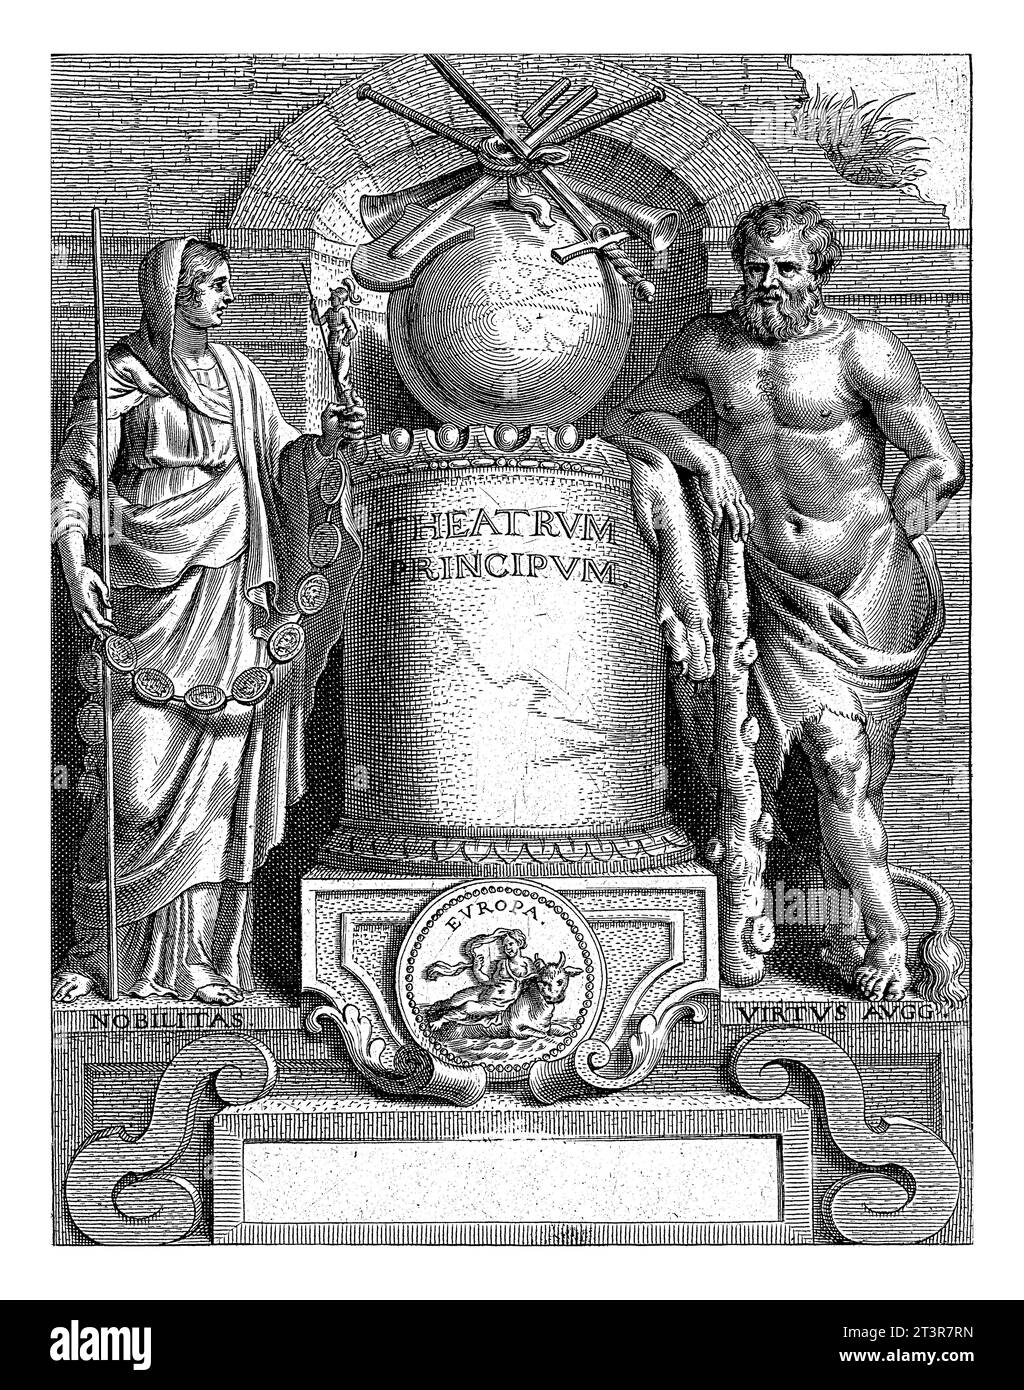 Title print with Hercules and personification of History, Pieter de Jode (II), after Erasmus Quellinus (II), 1651 Stock Photo